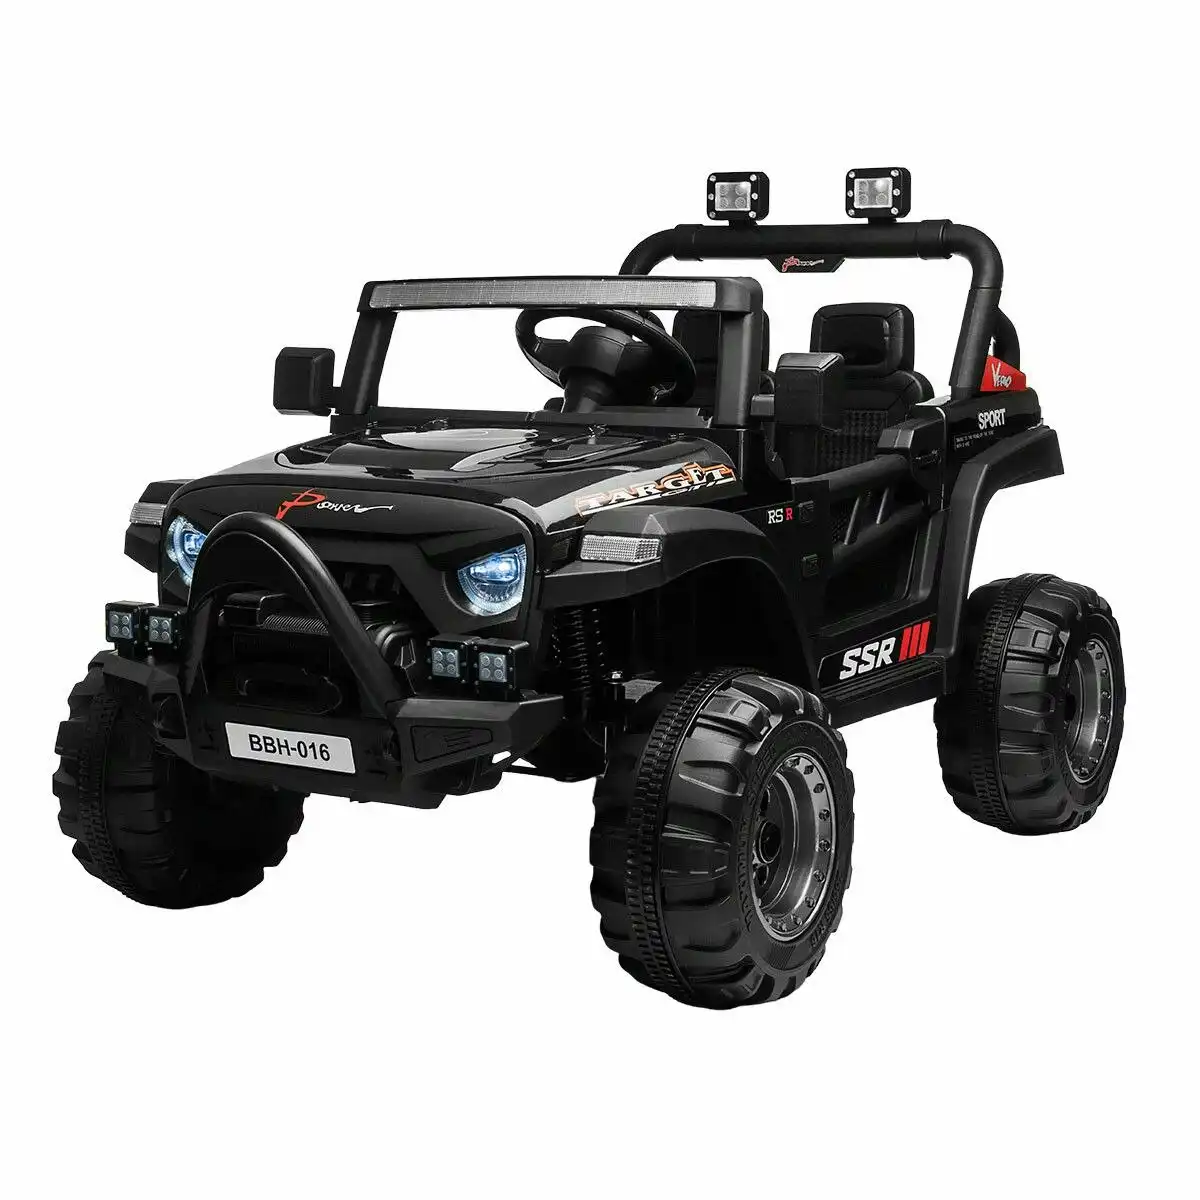 Kidbot Electric Ride On Car Vehicle Off Road Toy Jeep Truck for Kids Children with Parental Remote Control MP3 Flashing Lights Dual Openable Door 2.4G